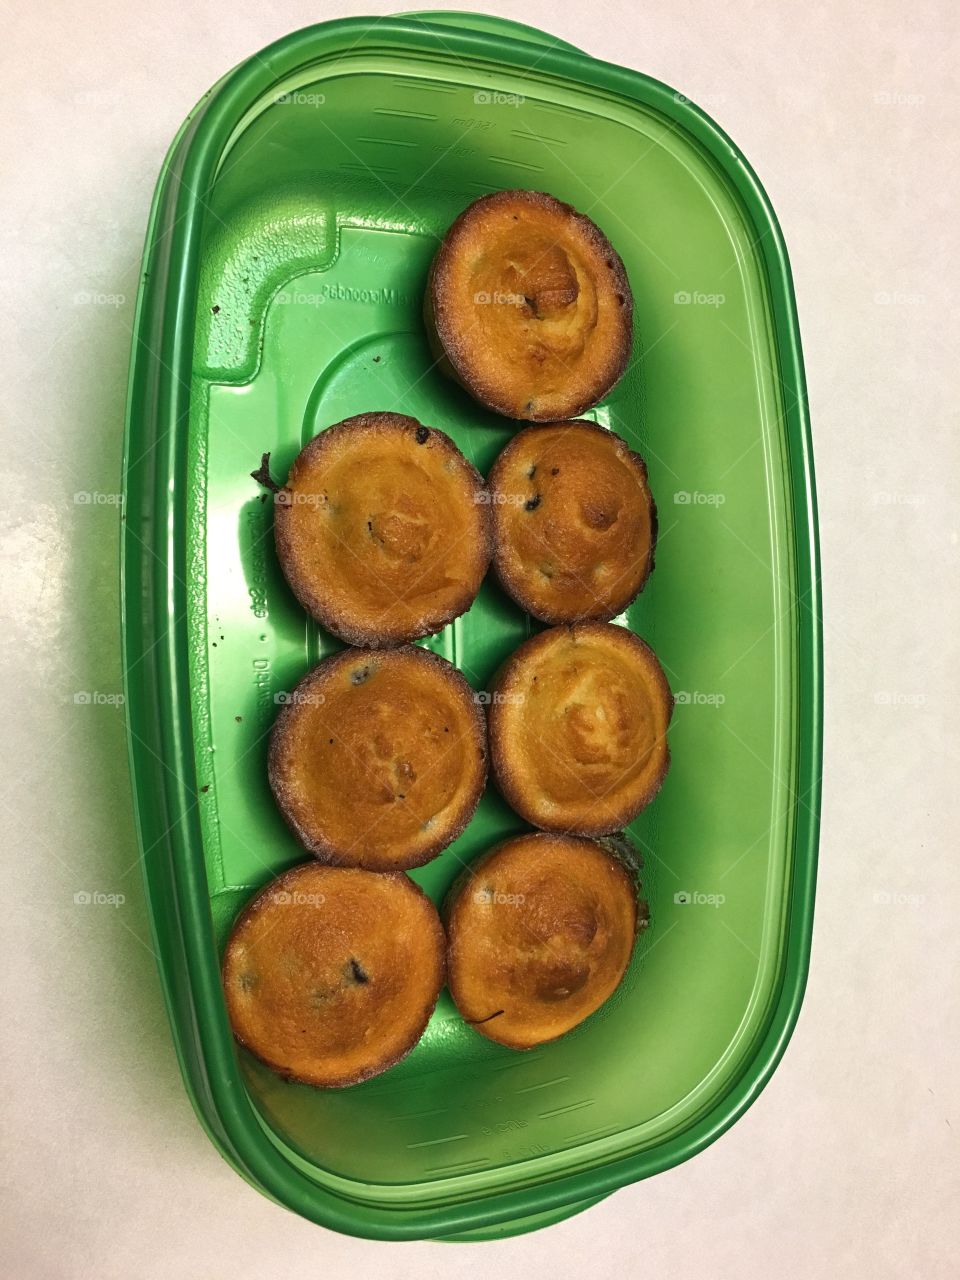 Muffins in green container
